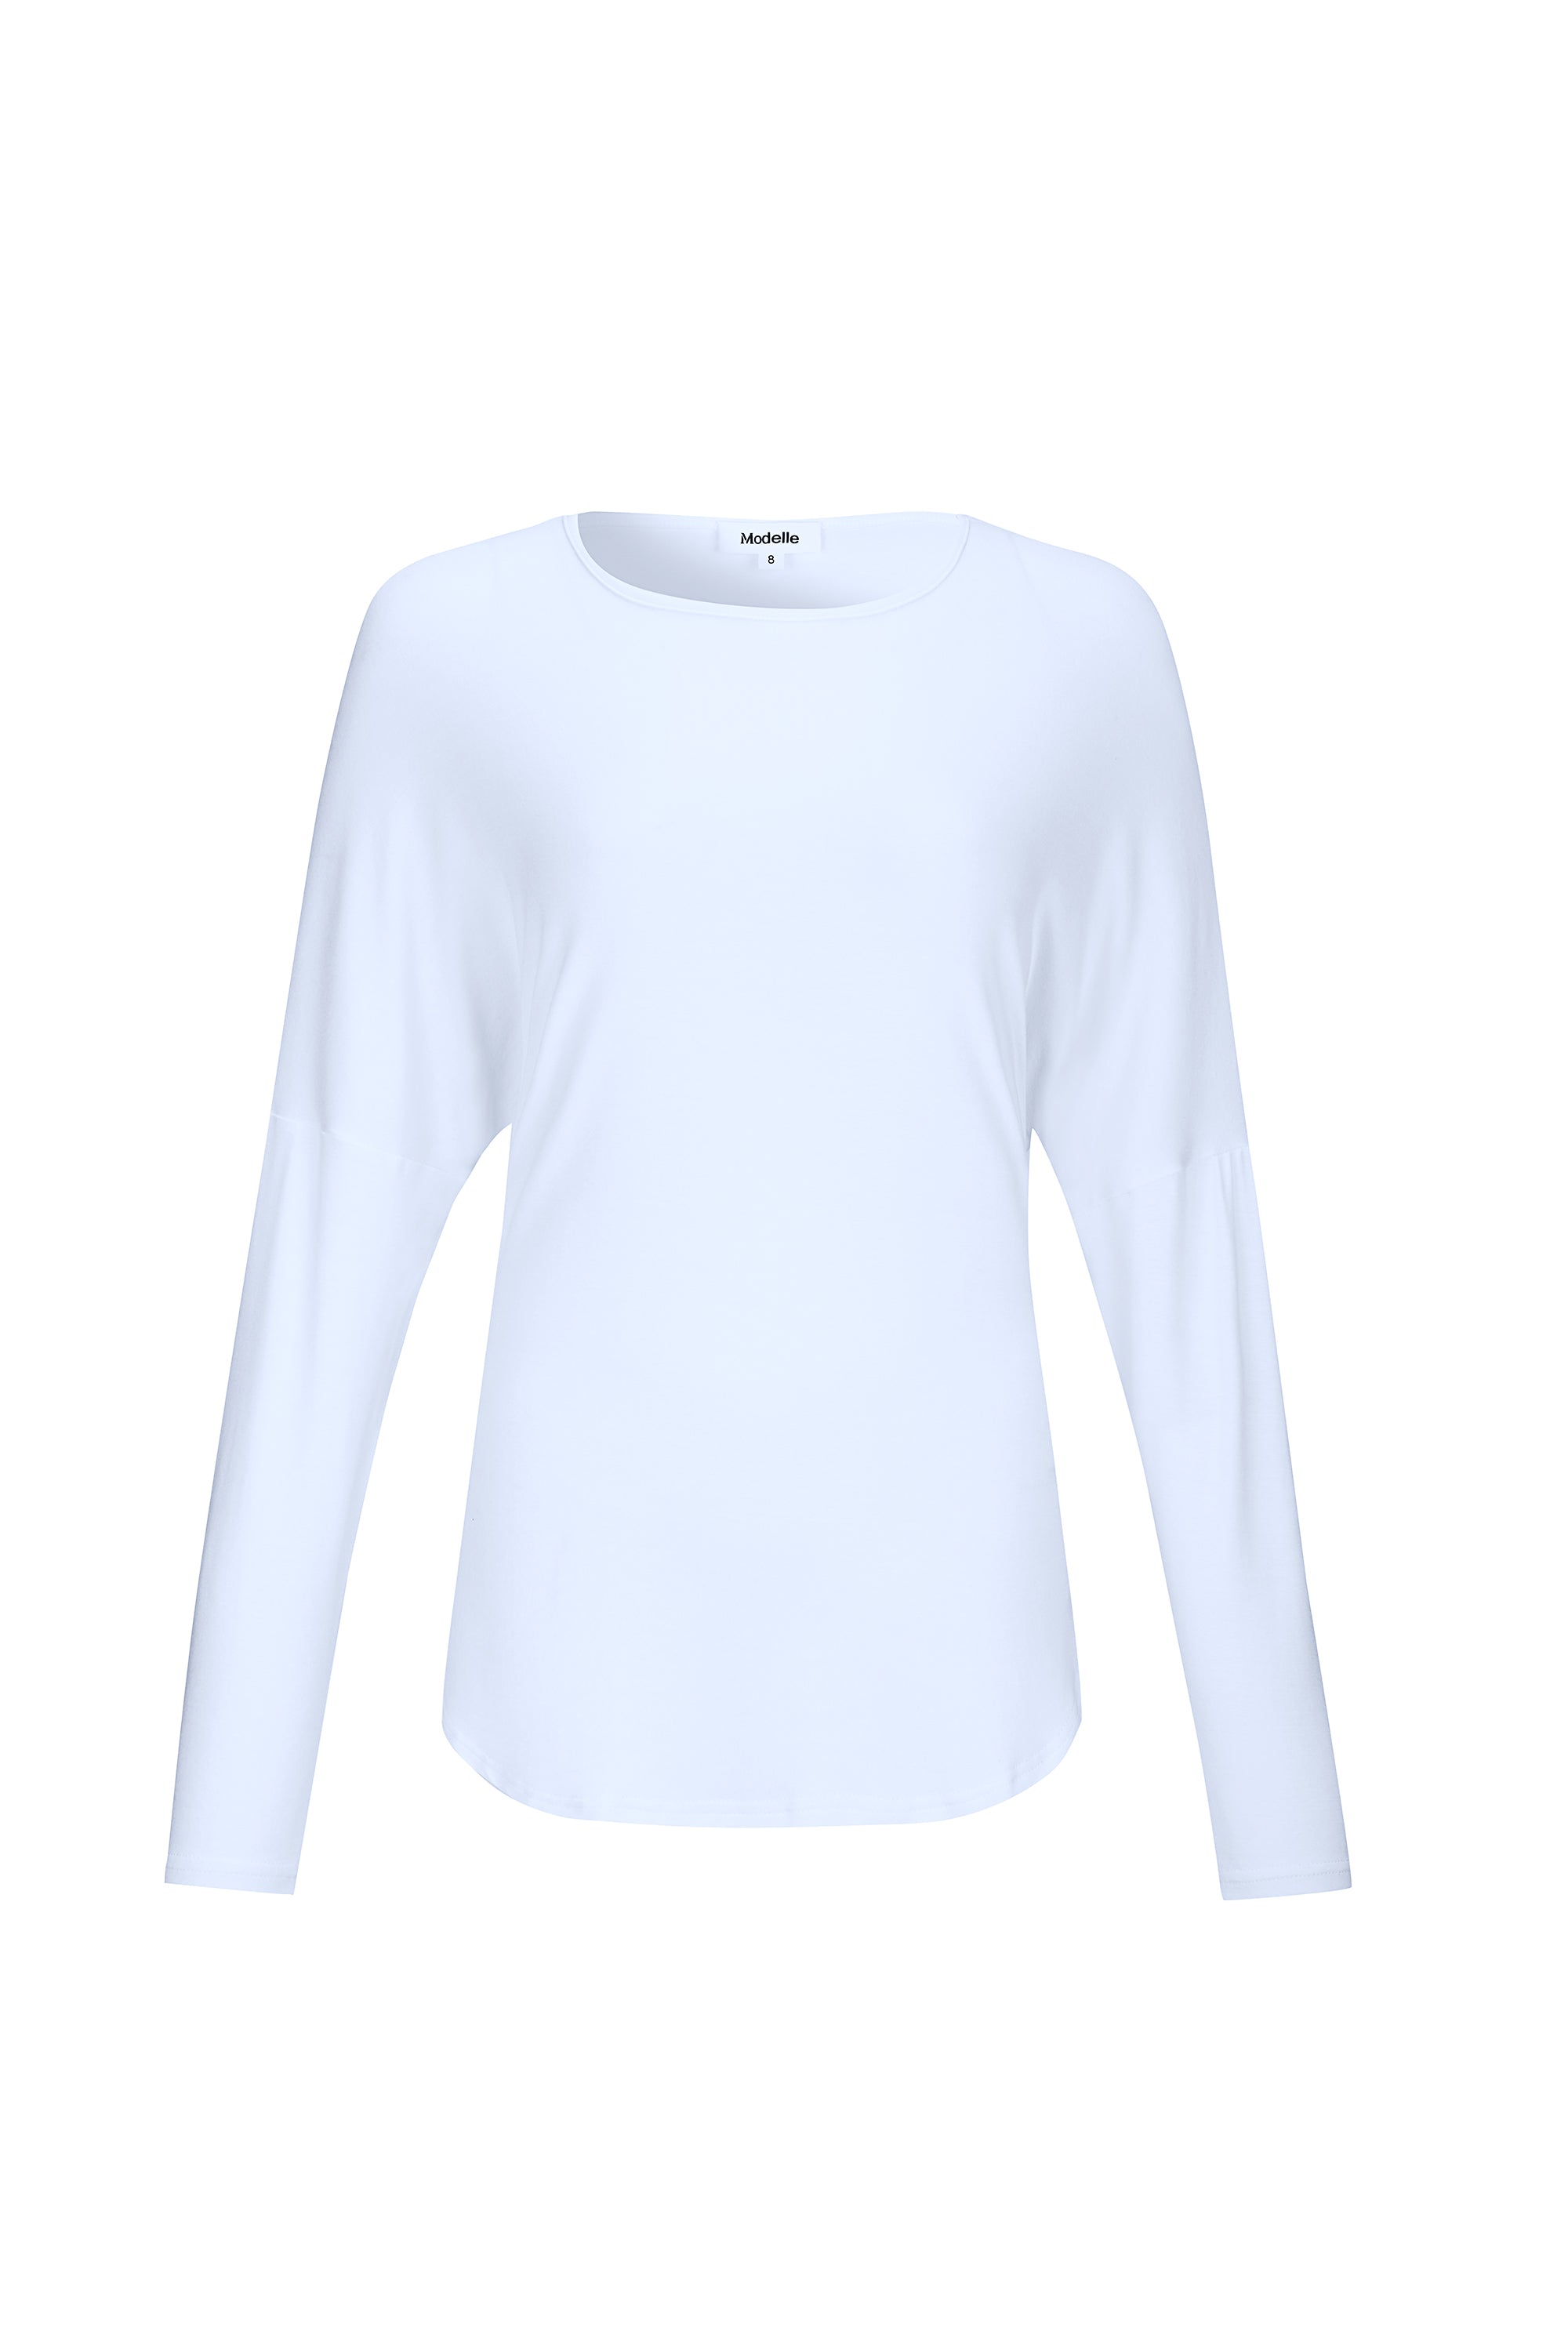 MDL00028White-top